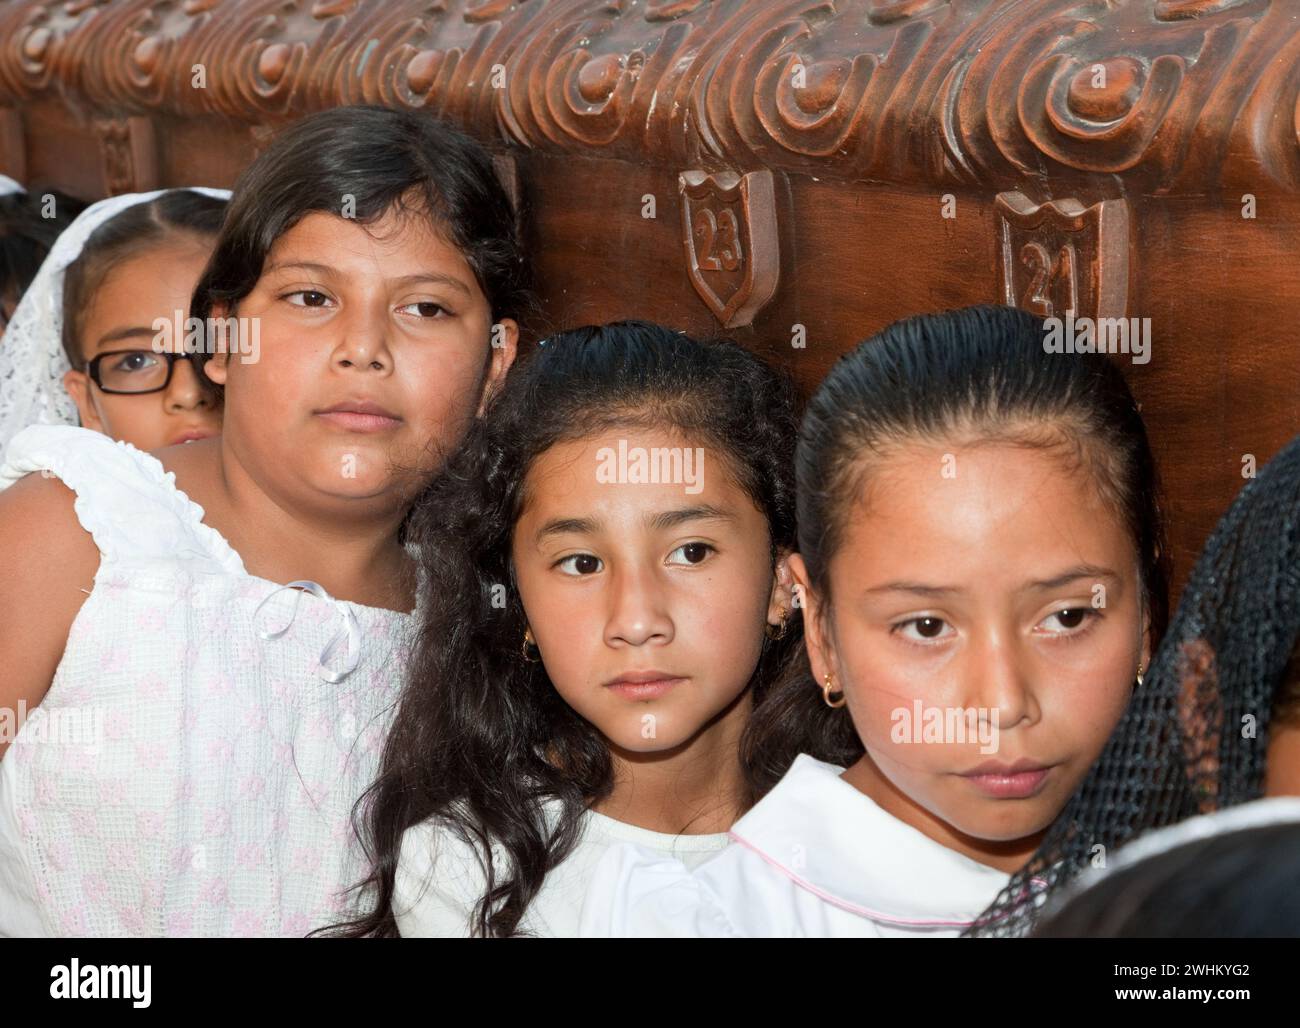 Antigua, Guatemala.  Semana Santa (Holy Week).  Young Girls Carry an Anda (Float) in a Religious Procession. Stock Photo